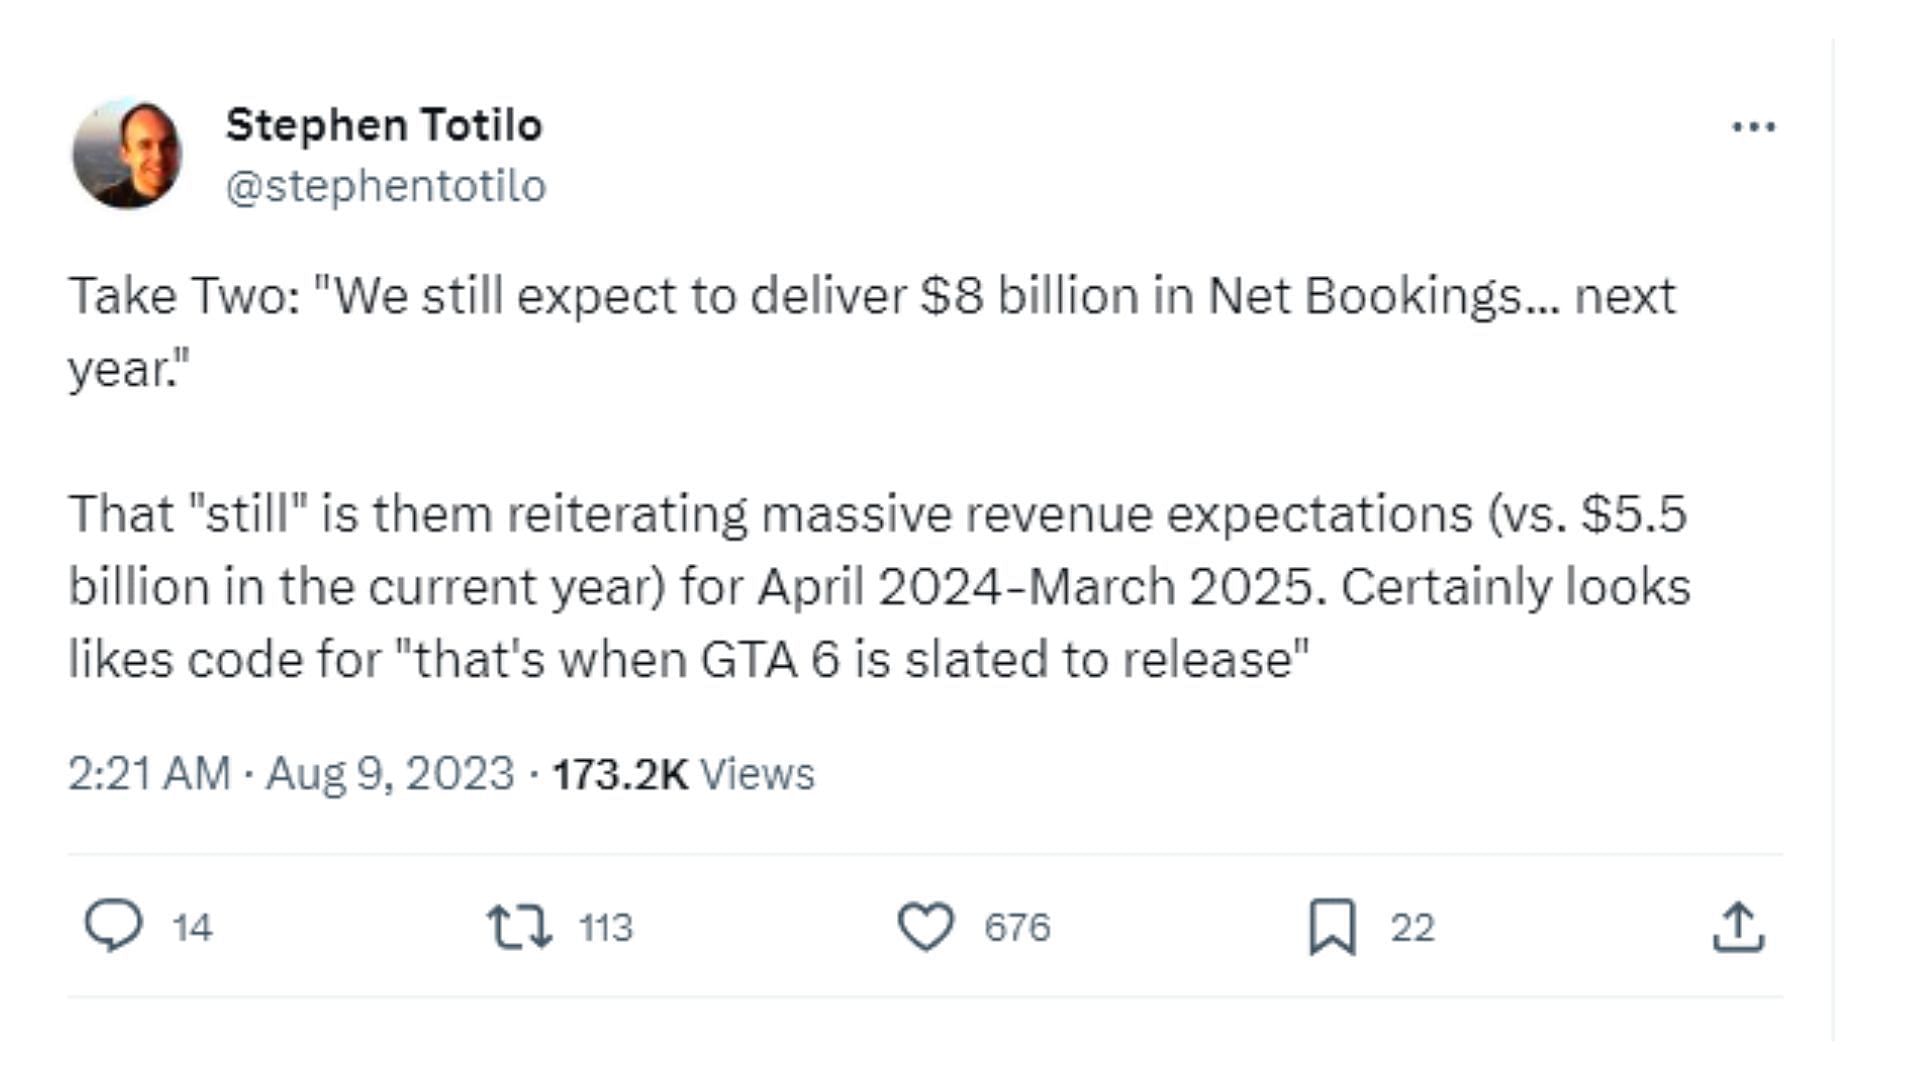 Take-Two has massive financial expectations for Fiscal Year 2025 (Image via X/@stephentotilo)